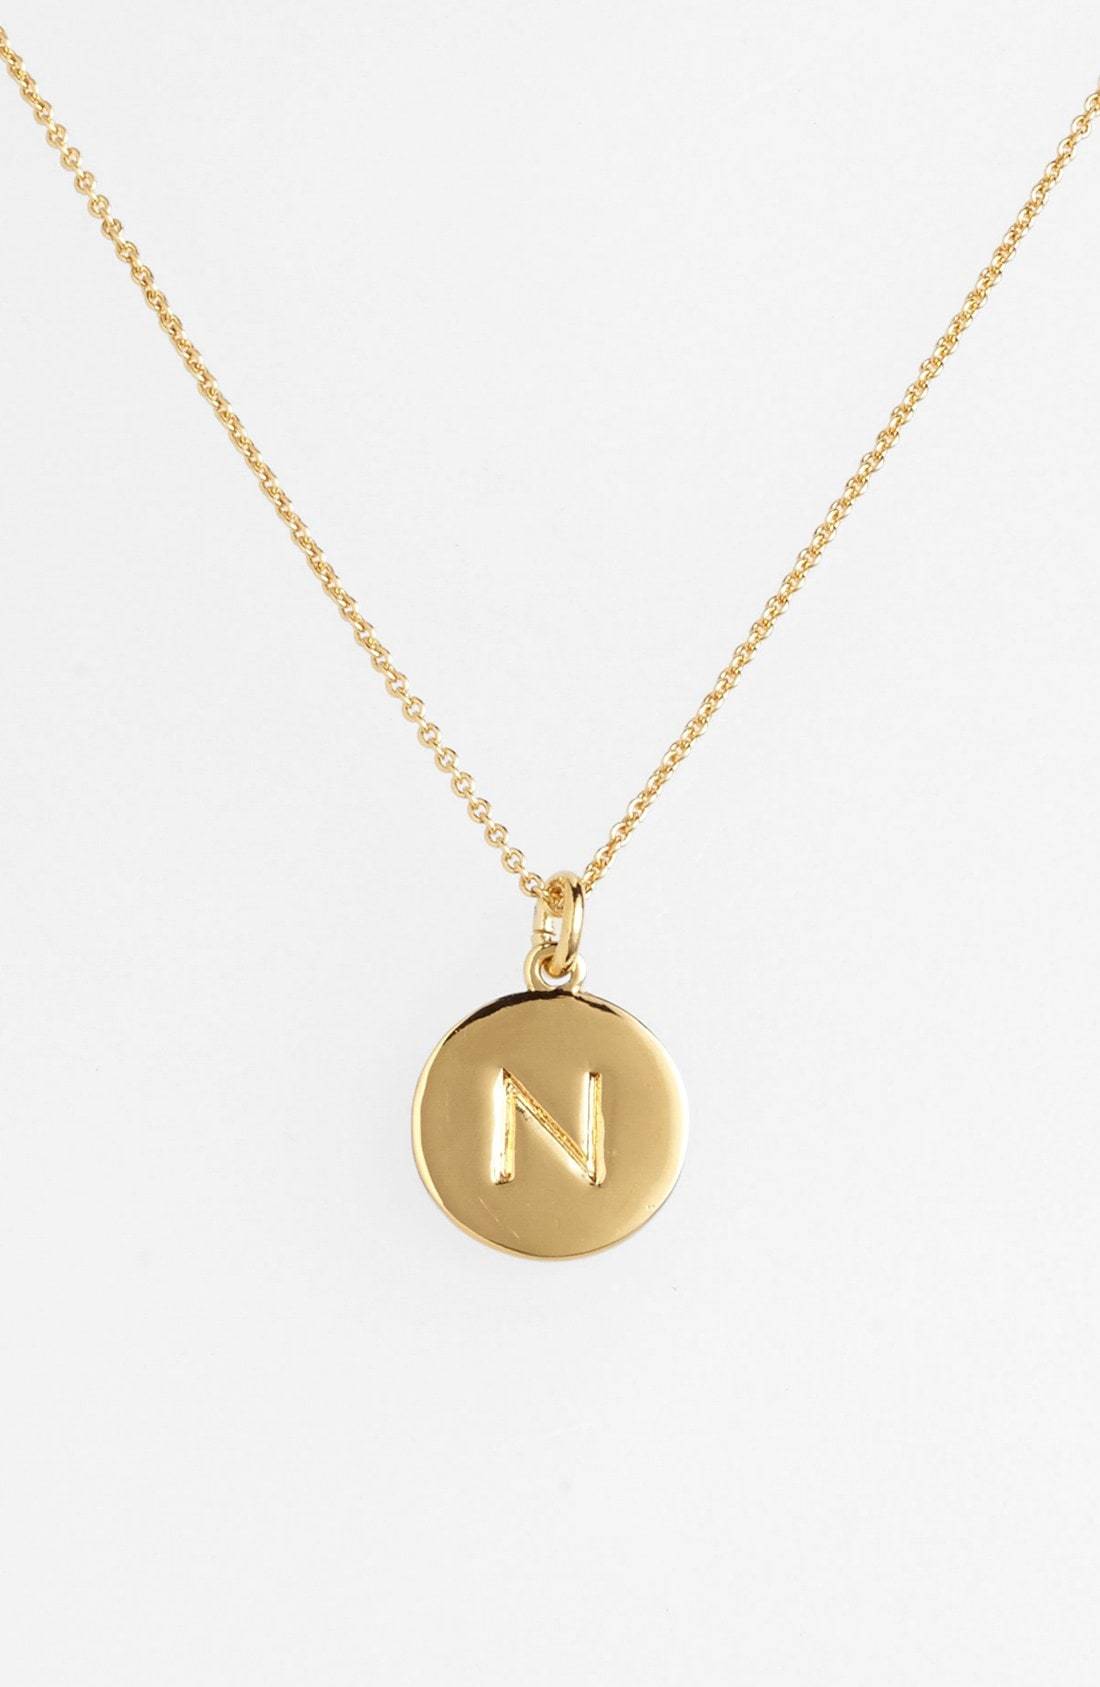 kate spade new york One In A Million Initial Pendant Necklace, $58 |  Nordstrom | Lookastic